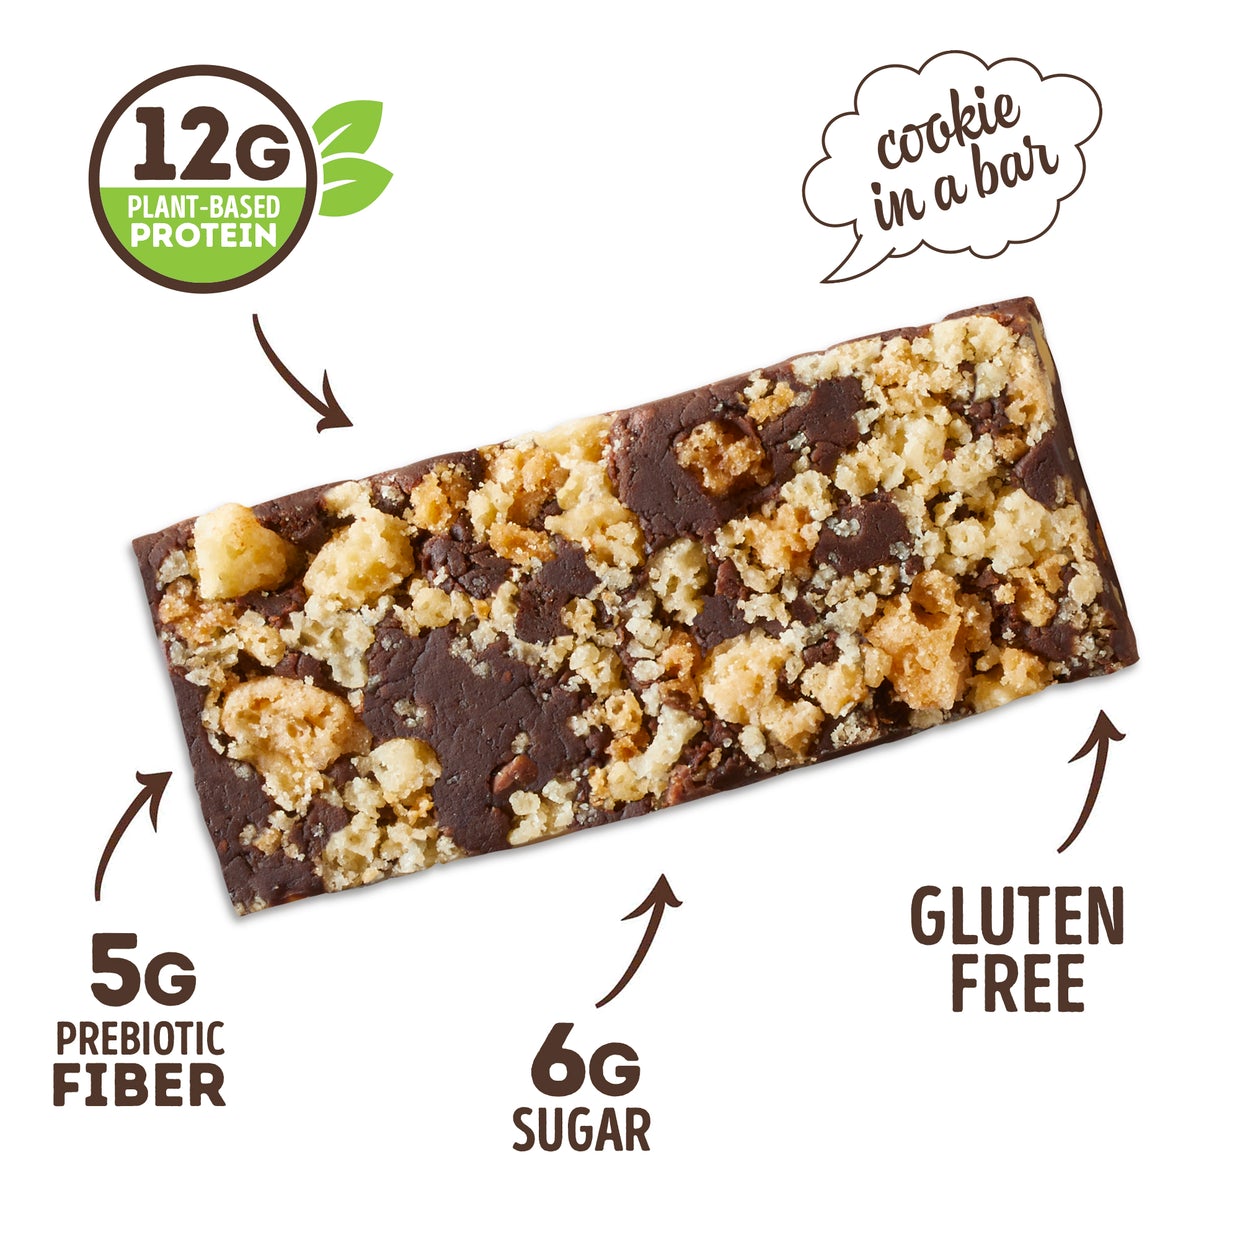 Lenny & Larry’s The Complete Cookie-fied Vegan Protein Bar (1 bar) lenny-larry-s-the-complete-cookie-filled-bar-1-bar Protein Snacks Peanut Butter Chocolate Chip BEST BY MARCH/2023,Chocolate Almond Sea Salt  BEST BY MARCH/2023,Cookie & Cream  BEST BY MARCH/2023 Lenny & Larry